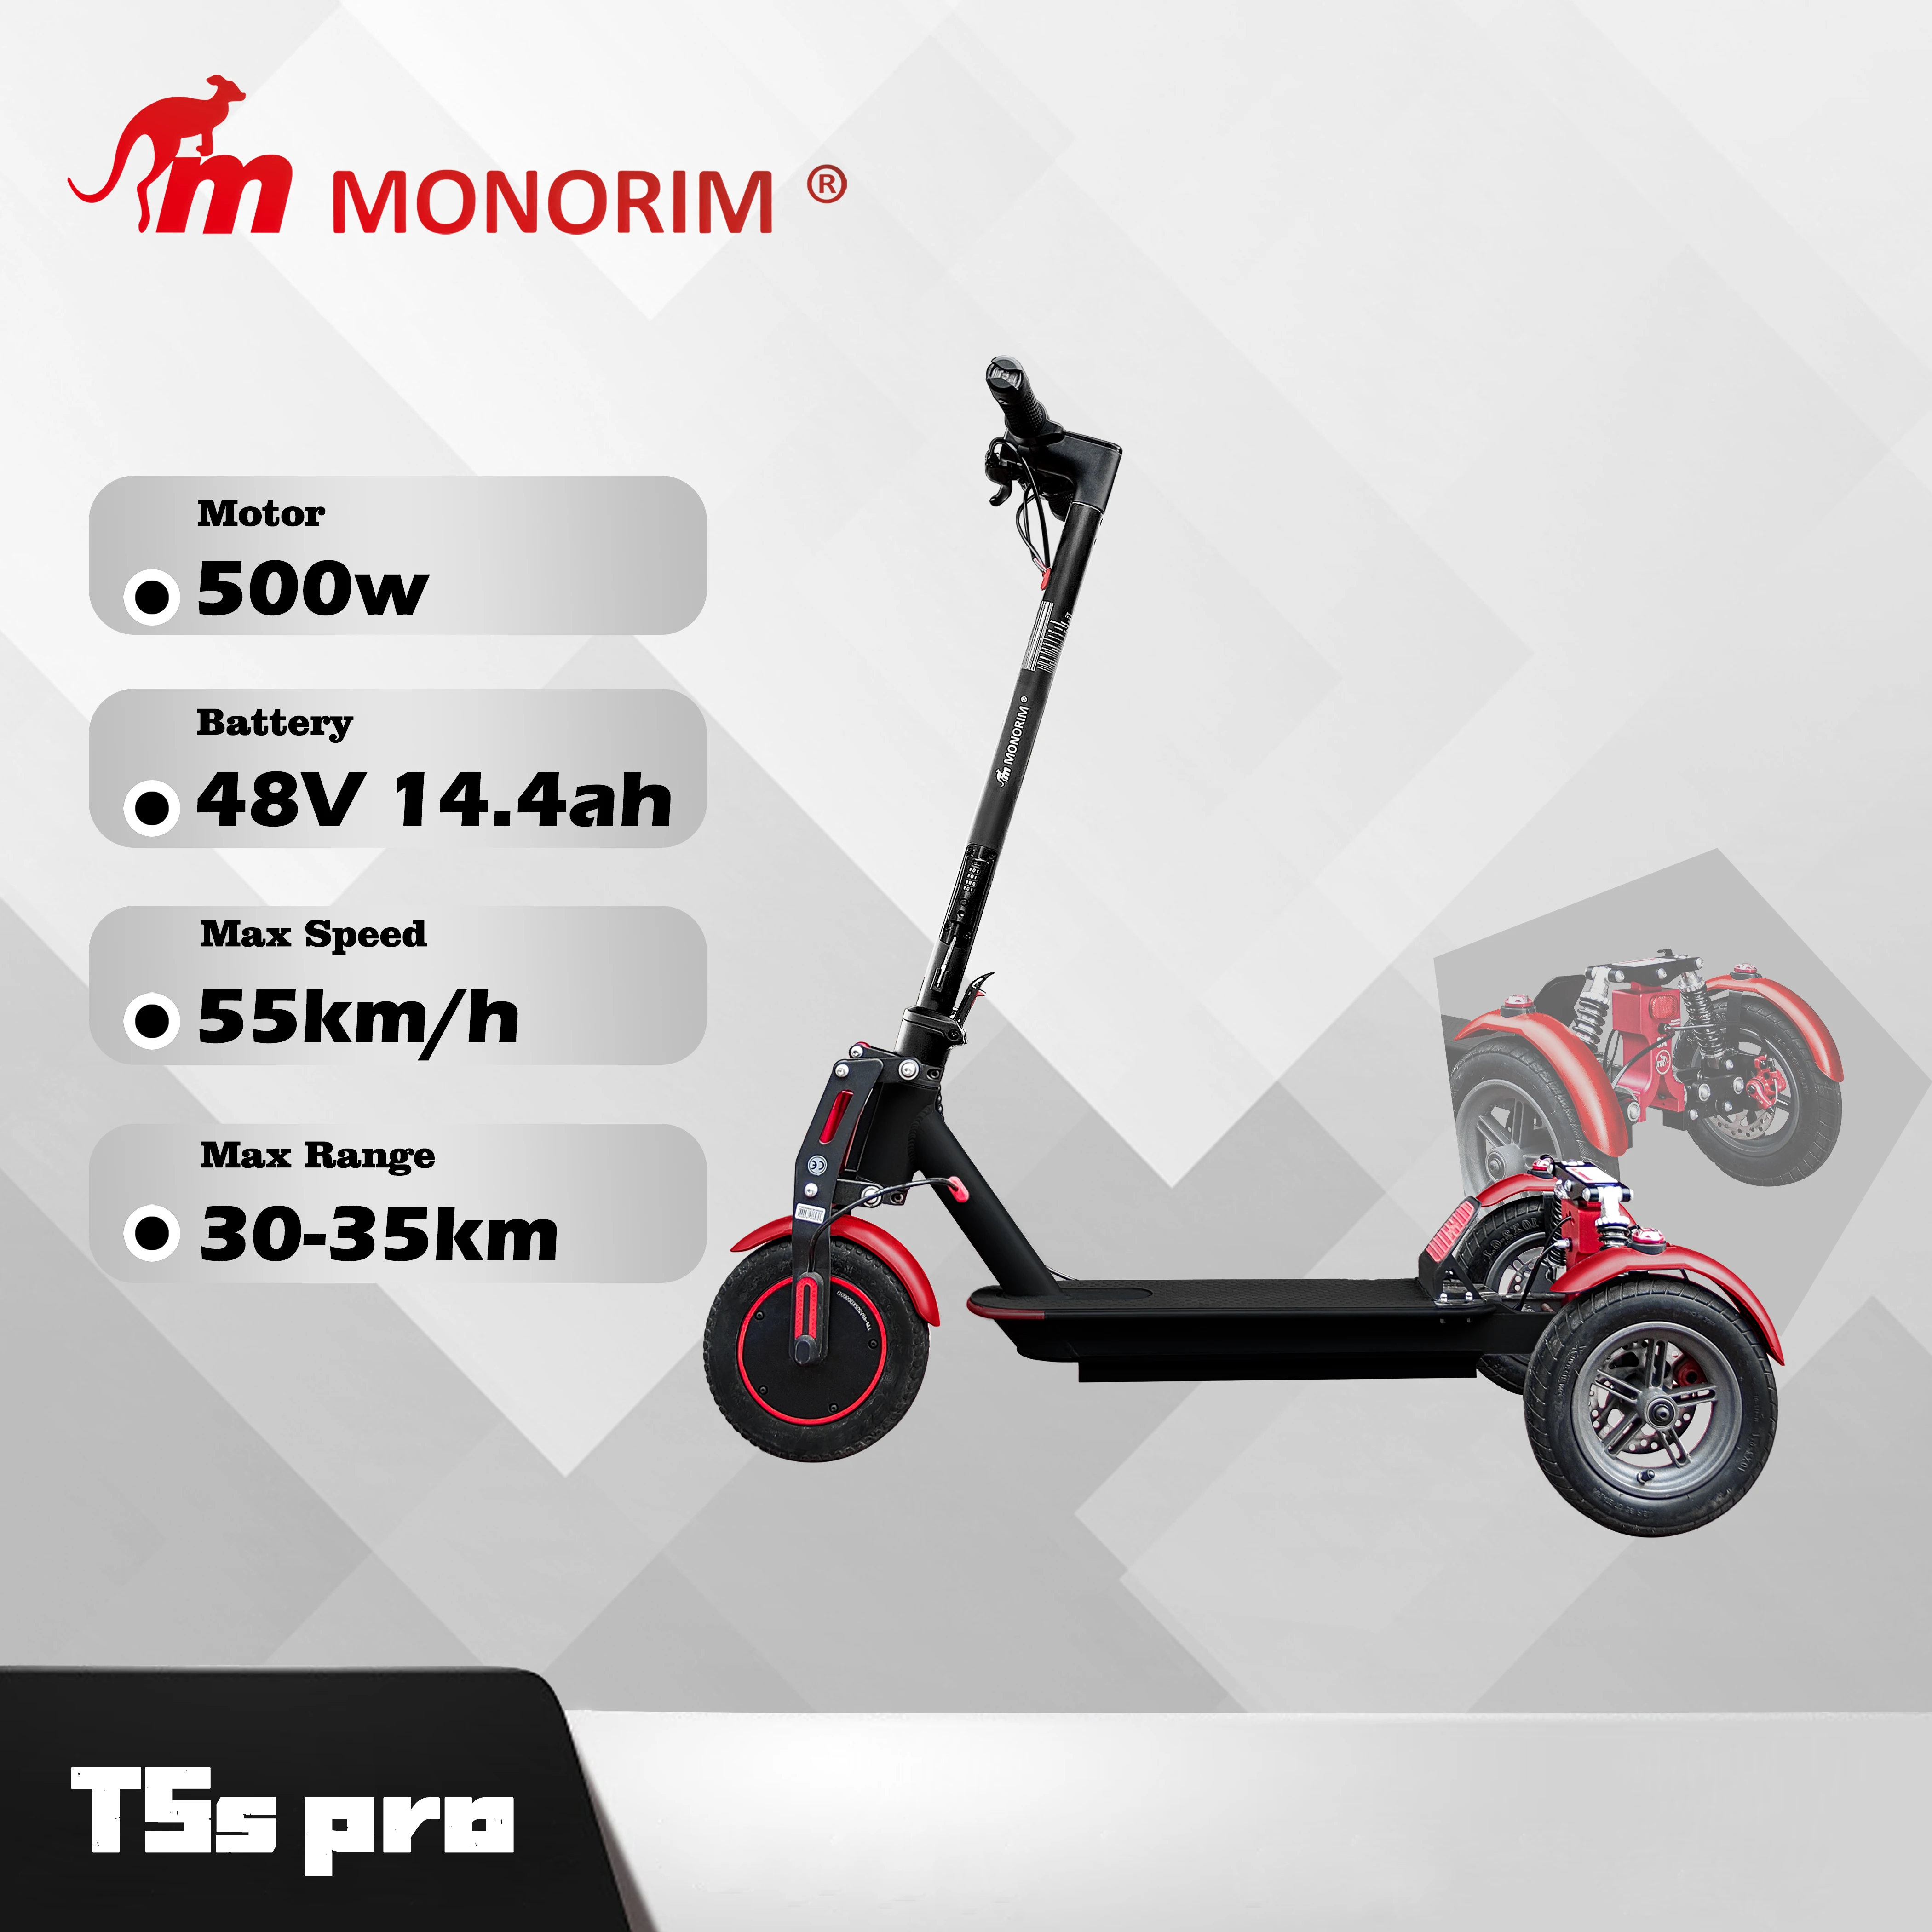 

Monorim T5S Pro Electric Scooter X3 Wheel 48v 500w 14.4ah Max Speed 55km/h, Dual Rear Wheels for Extra Stability